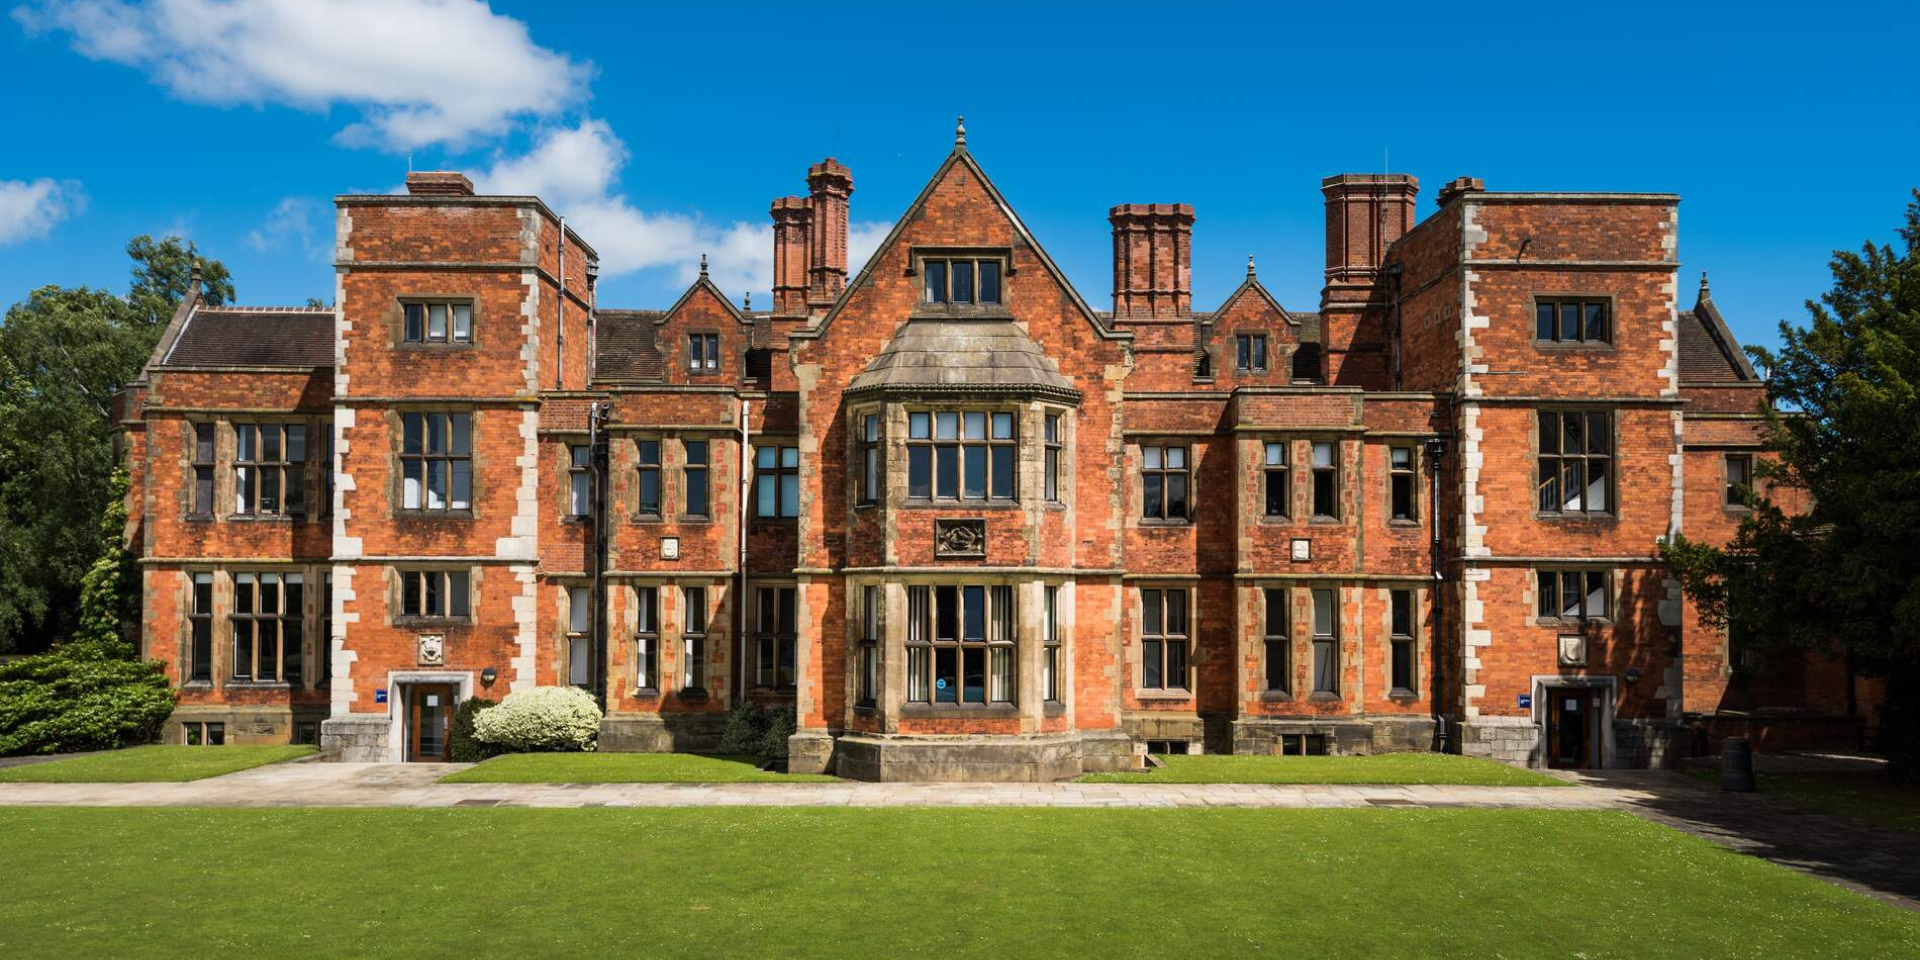 Featured image for “Heslington Hall”